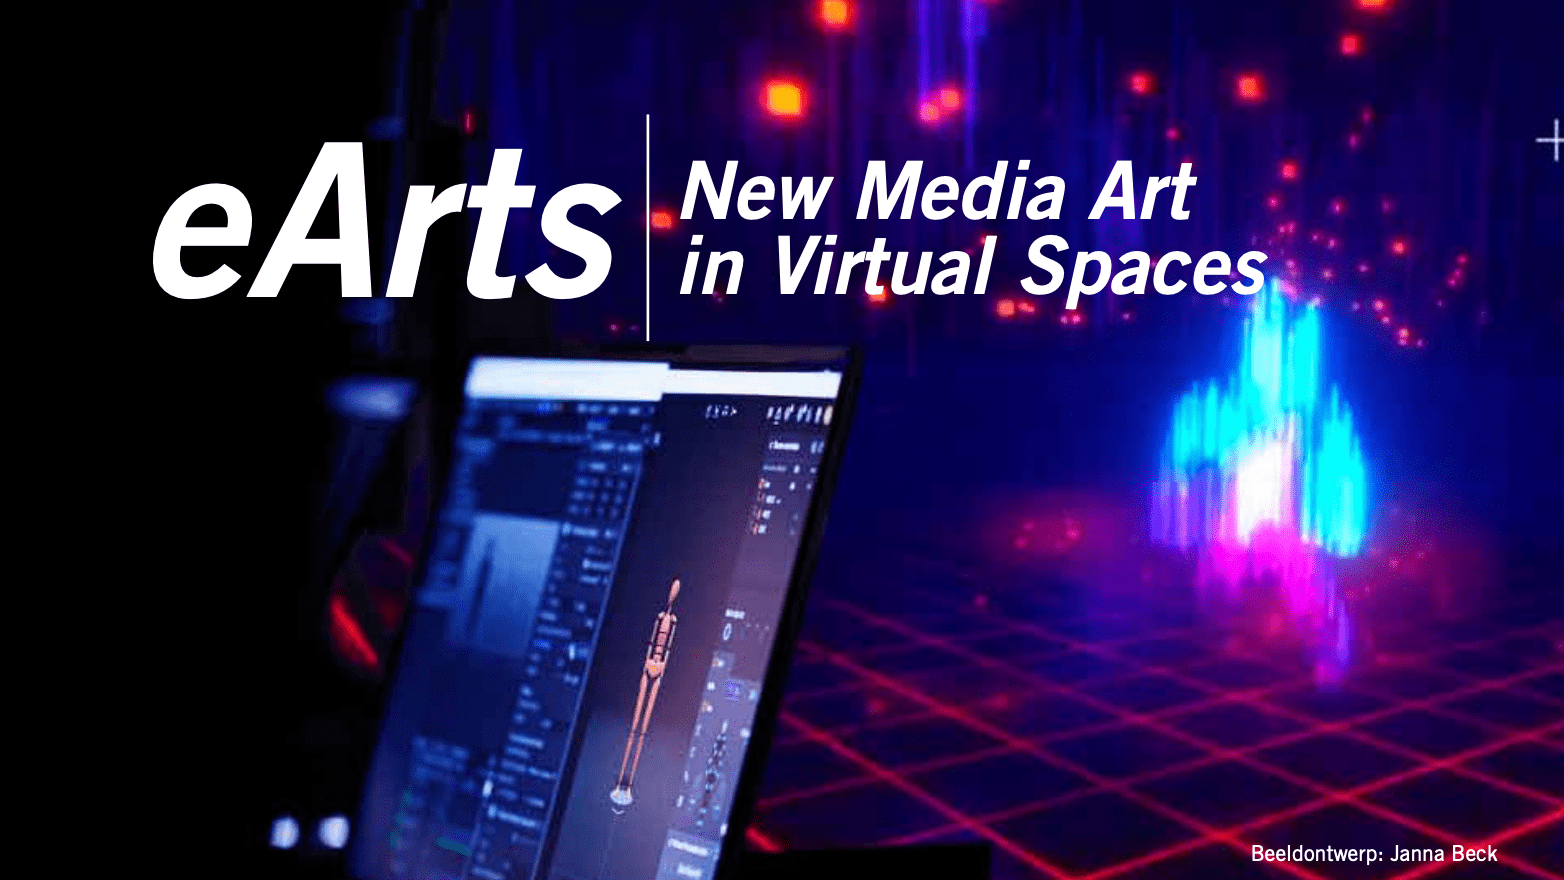 eArts: New Media Art in Virtual Spaces